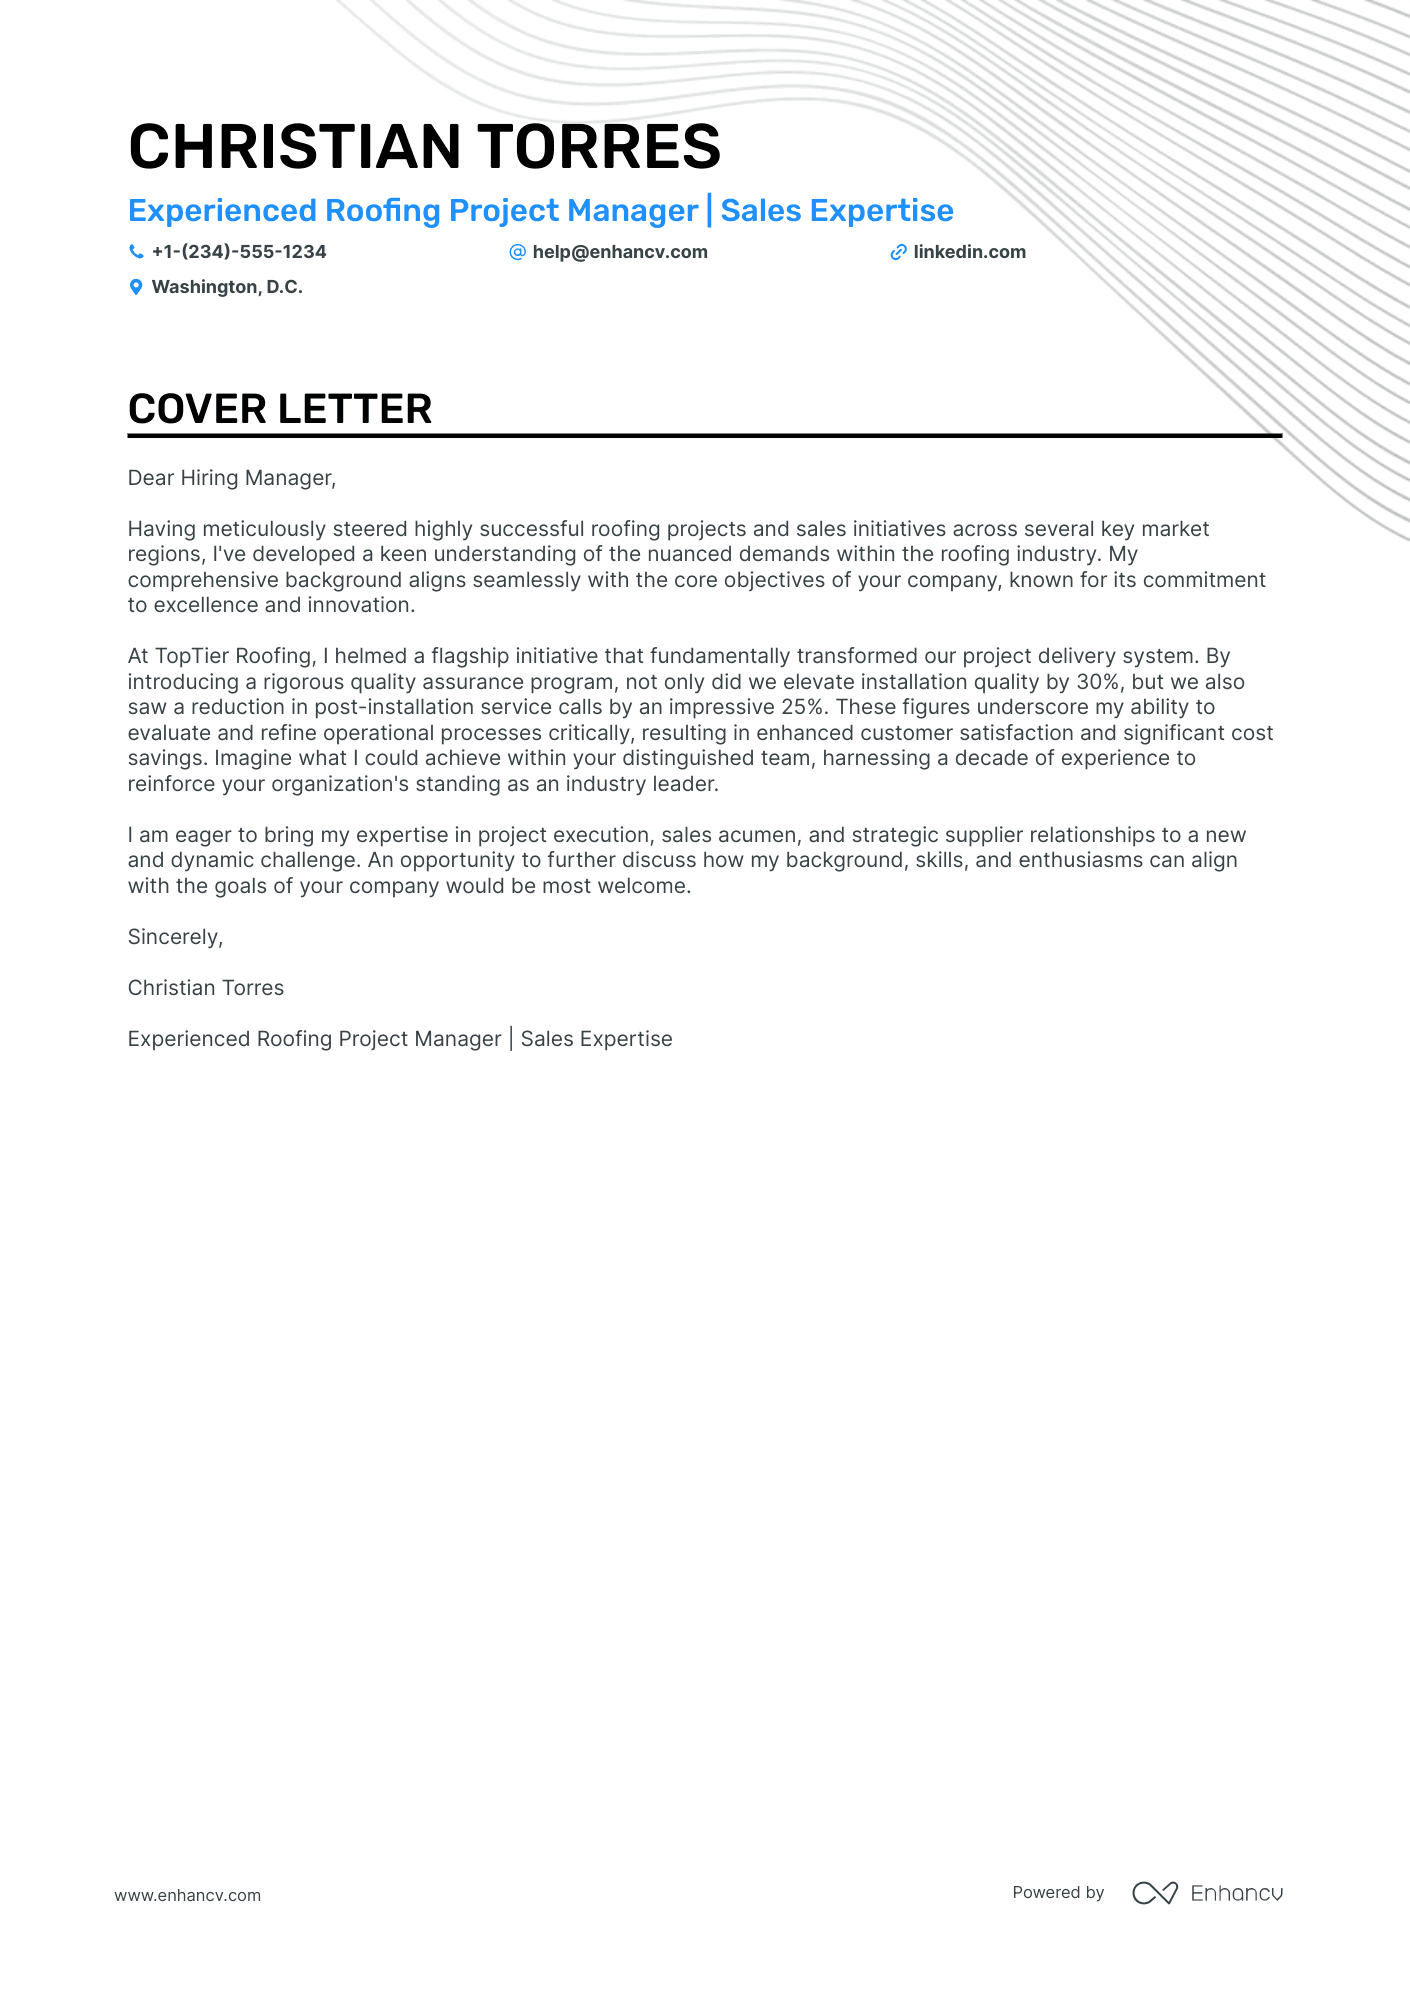 Roofing Project Manager cover letter